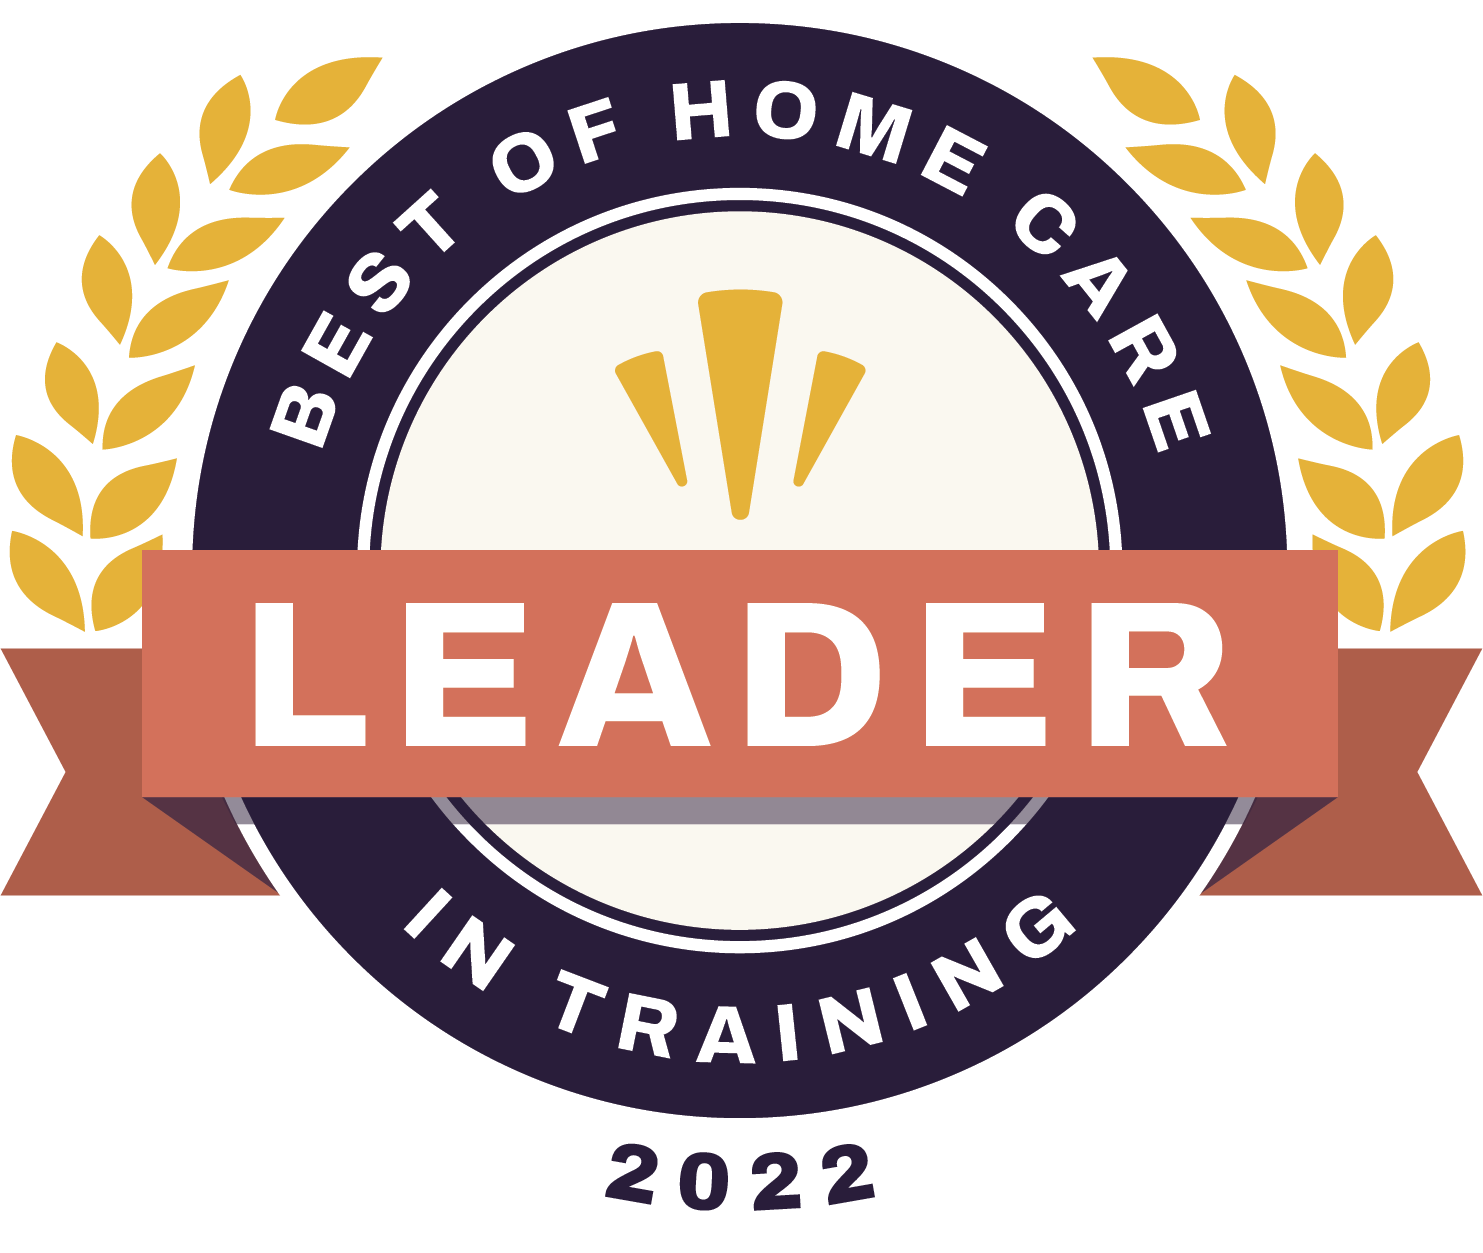 Read more about the article PC Home Health was Awarded Best of Home Leader in Training